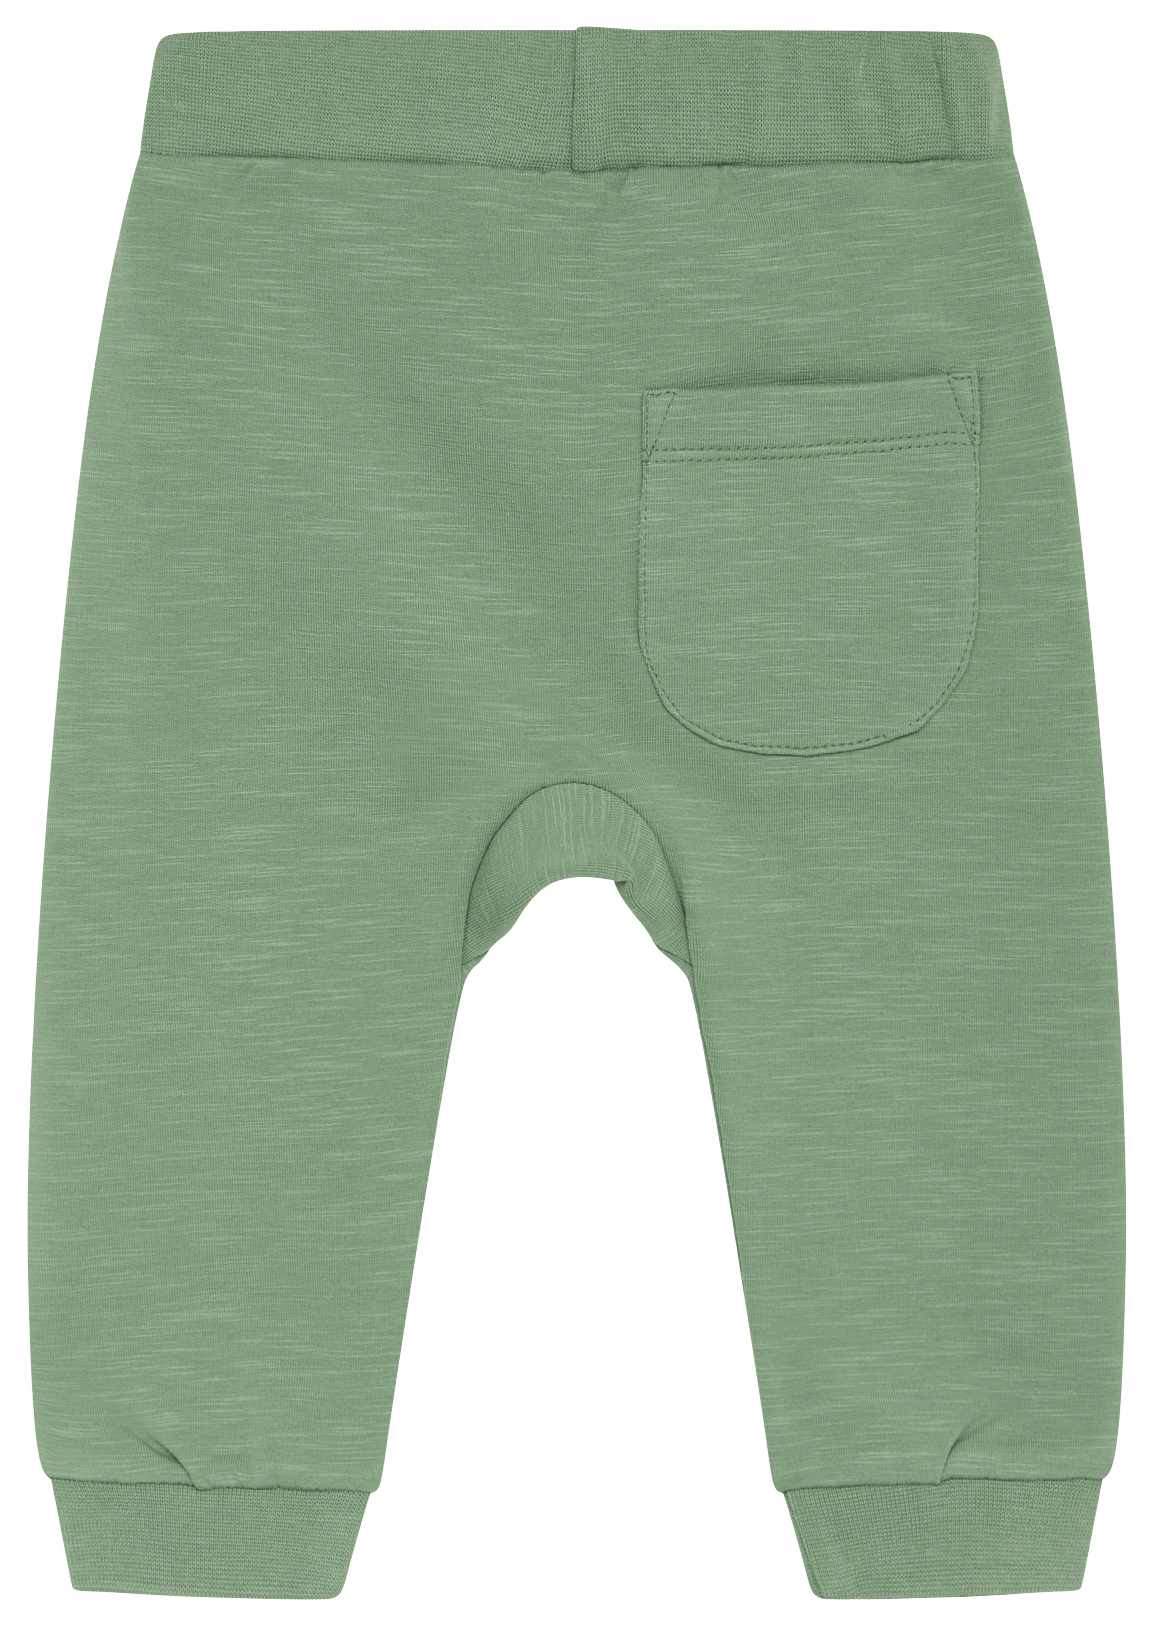 Hust & Claire G Joggingtrousers Spruce